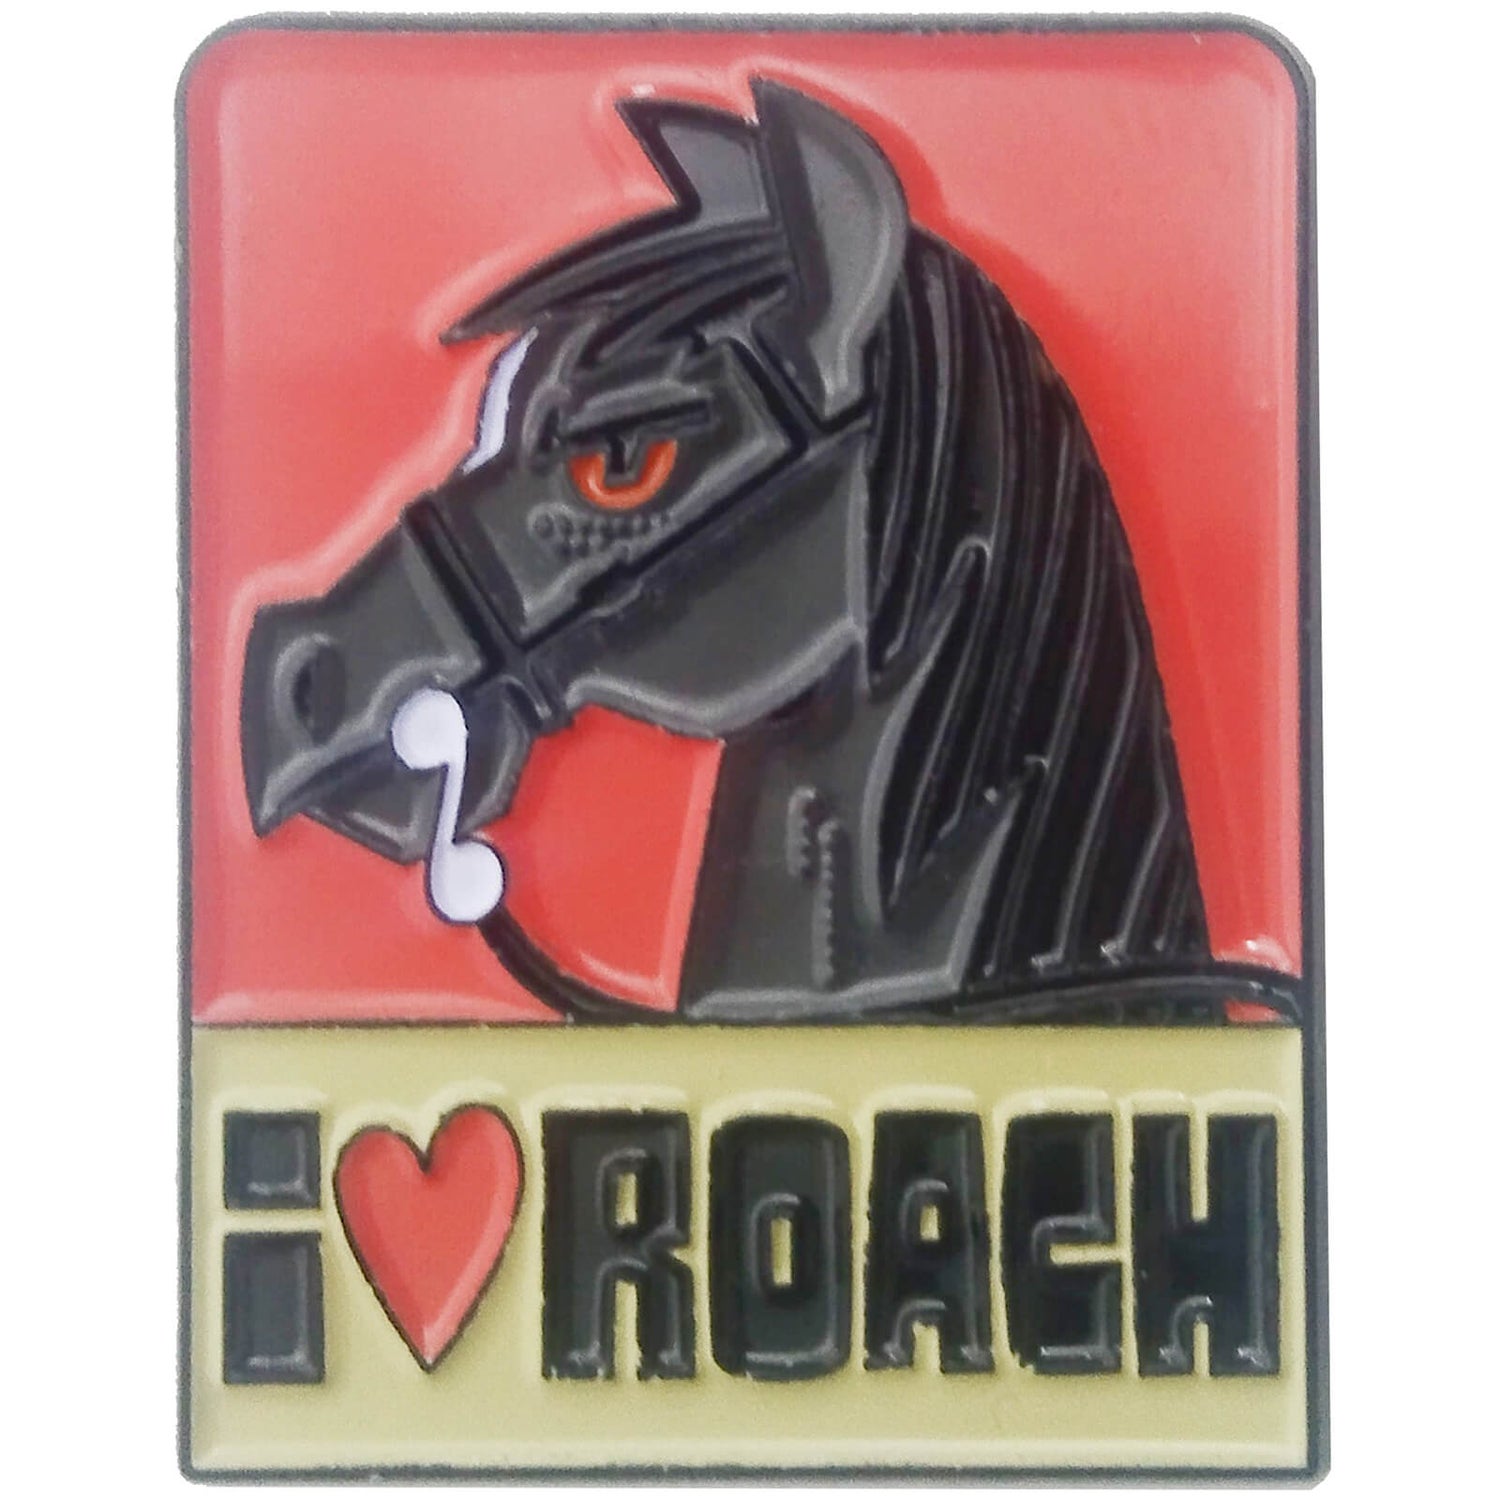 DUST! The Witcher - Roach Enamel Pin Badge - Limited Edition Exclusive To Zavvi